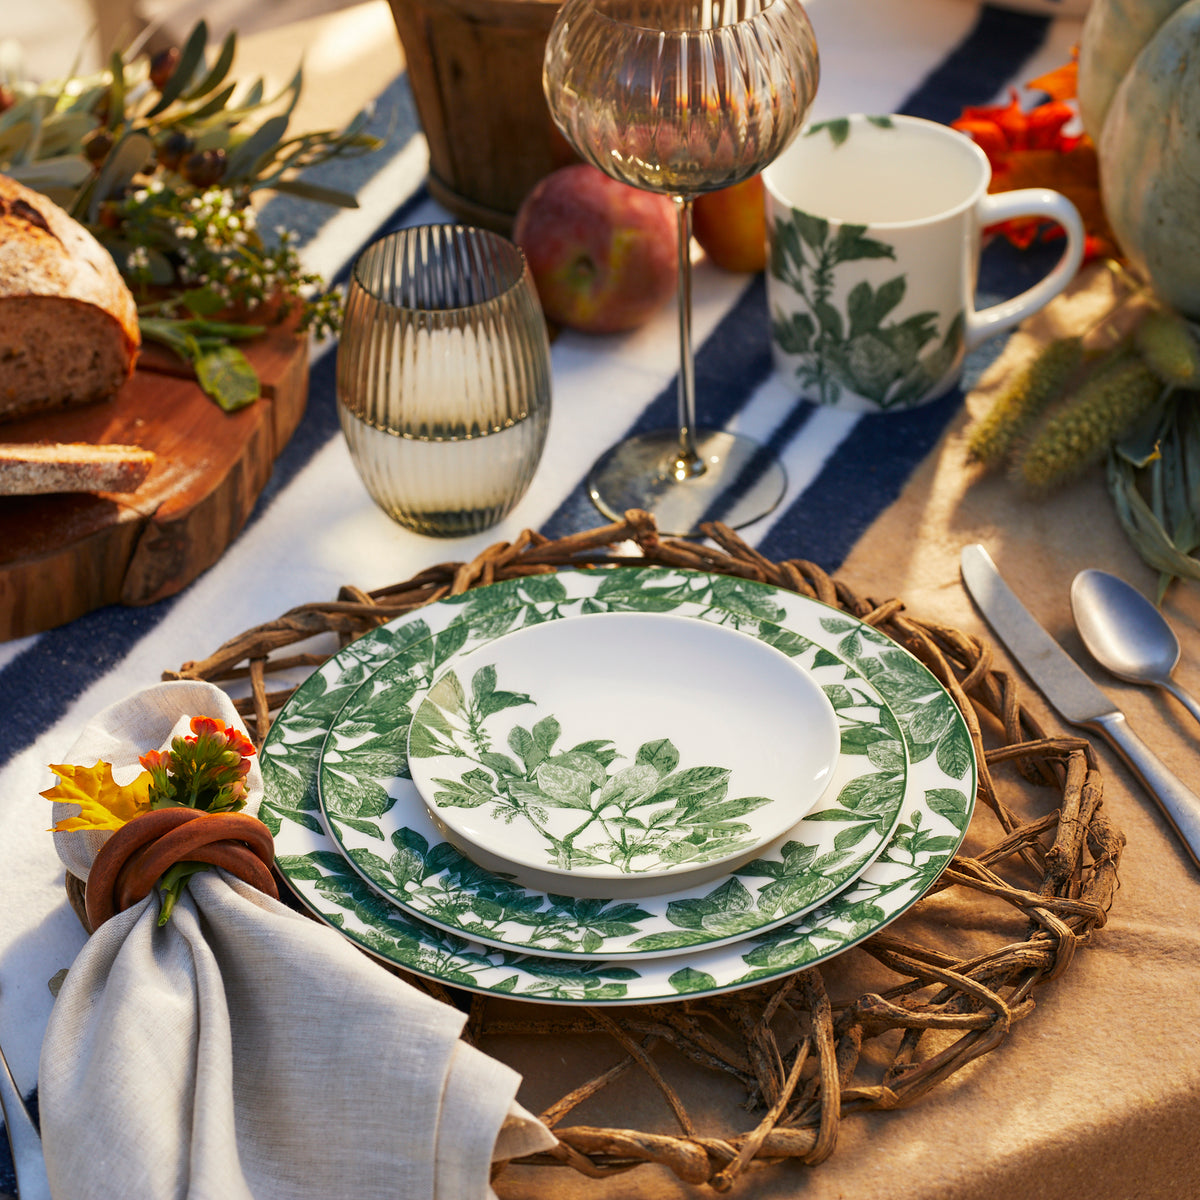 A table is set with green leafy patterned plates, a matching mug, glassware, and silverware on a woven placemat. Caskata Arbor Green Rimmed Salad Plates complement the setup. Bread, fruit, and decorative flowers are arranged nearby amidst an arbor of greenery.